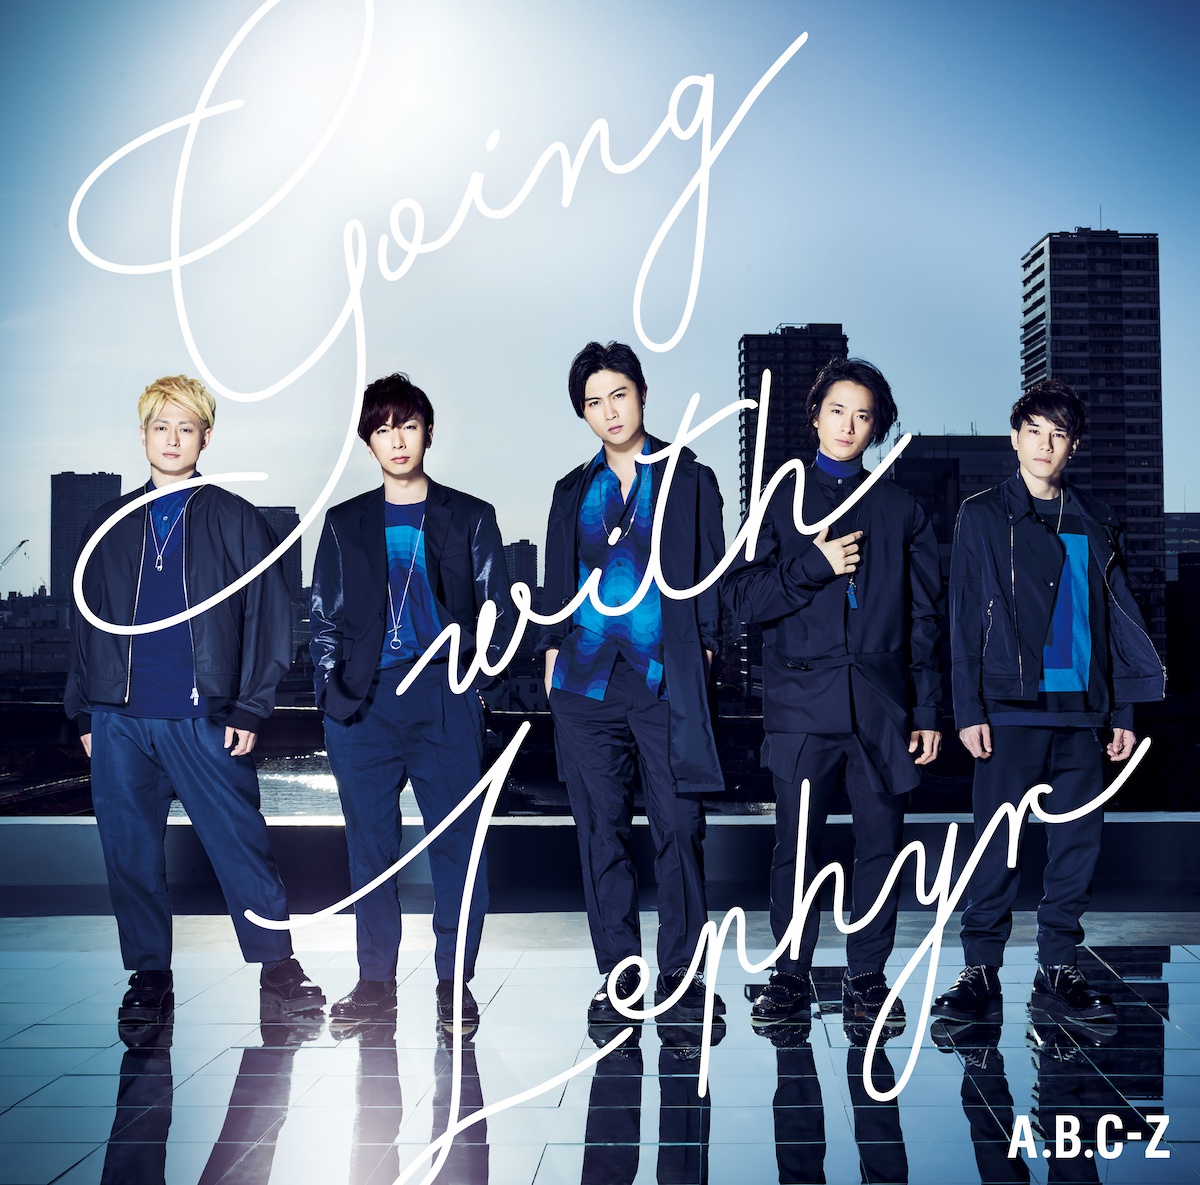 『A.B.C-Z - Want You Back』収録の『Going with Zephyr』ジャケット